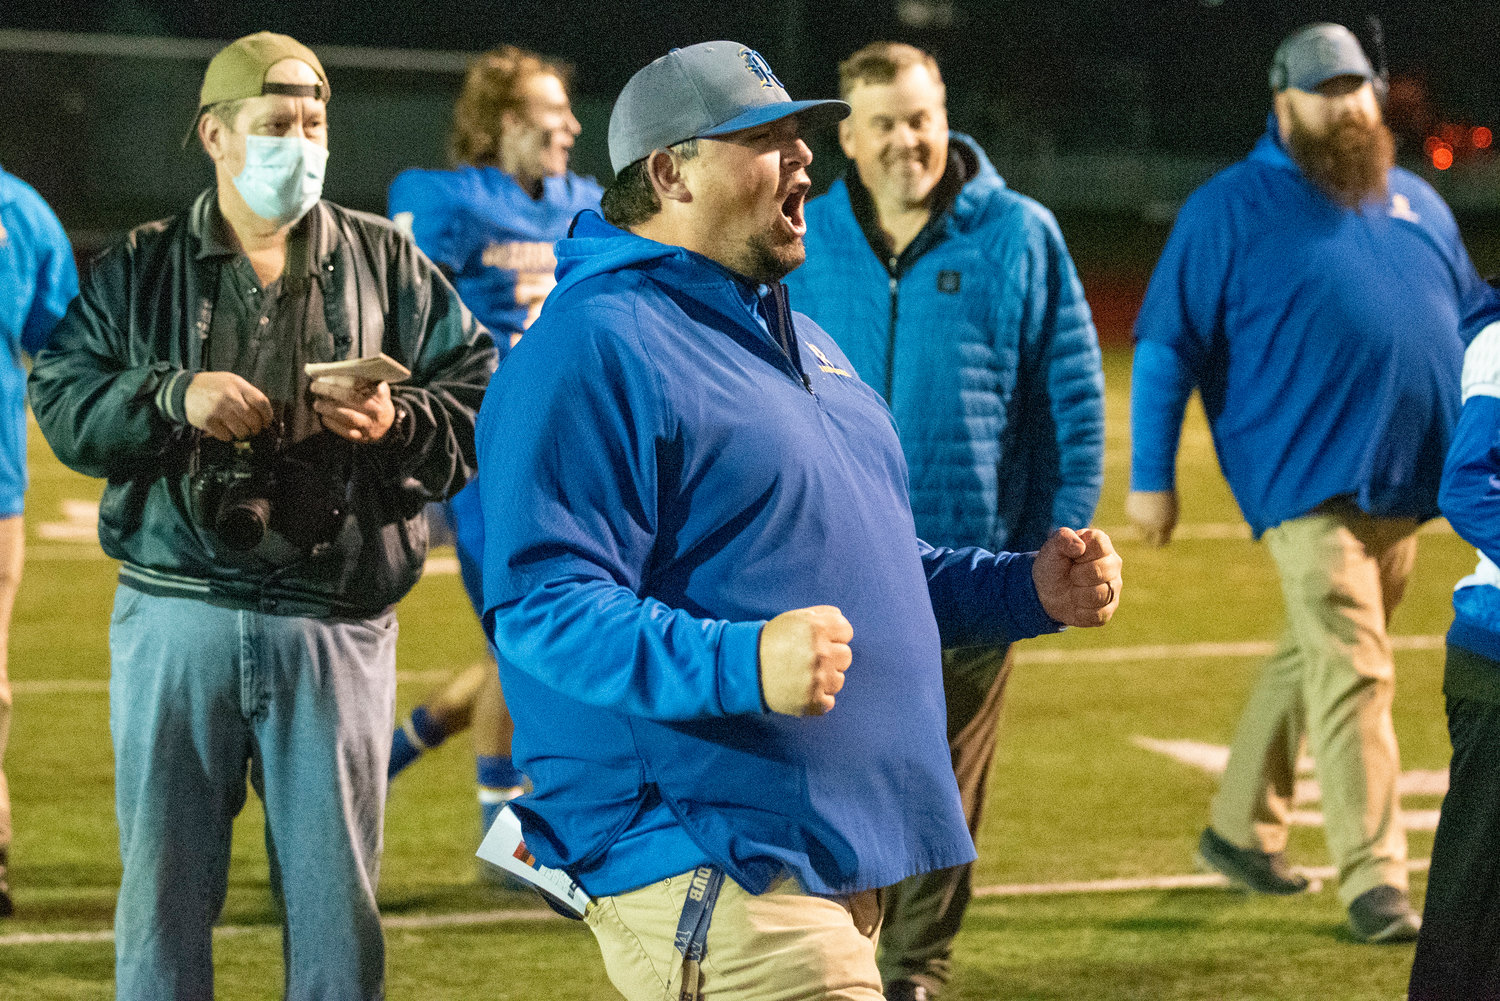 Rochester head coach A.J. Easley yells in celebration after the Warriors clinch the No. 3 seed in the 2A District 4 crossover playoffs Monday at Tiger Stadium.